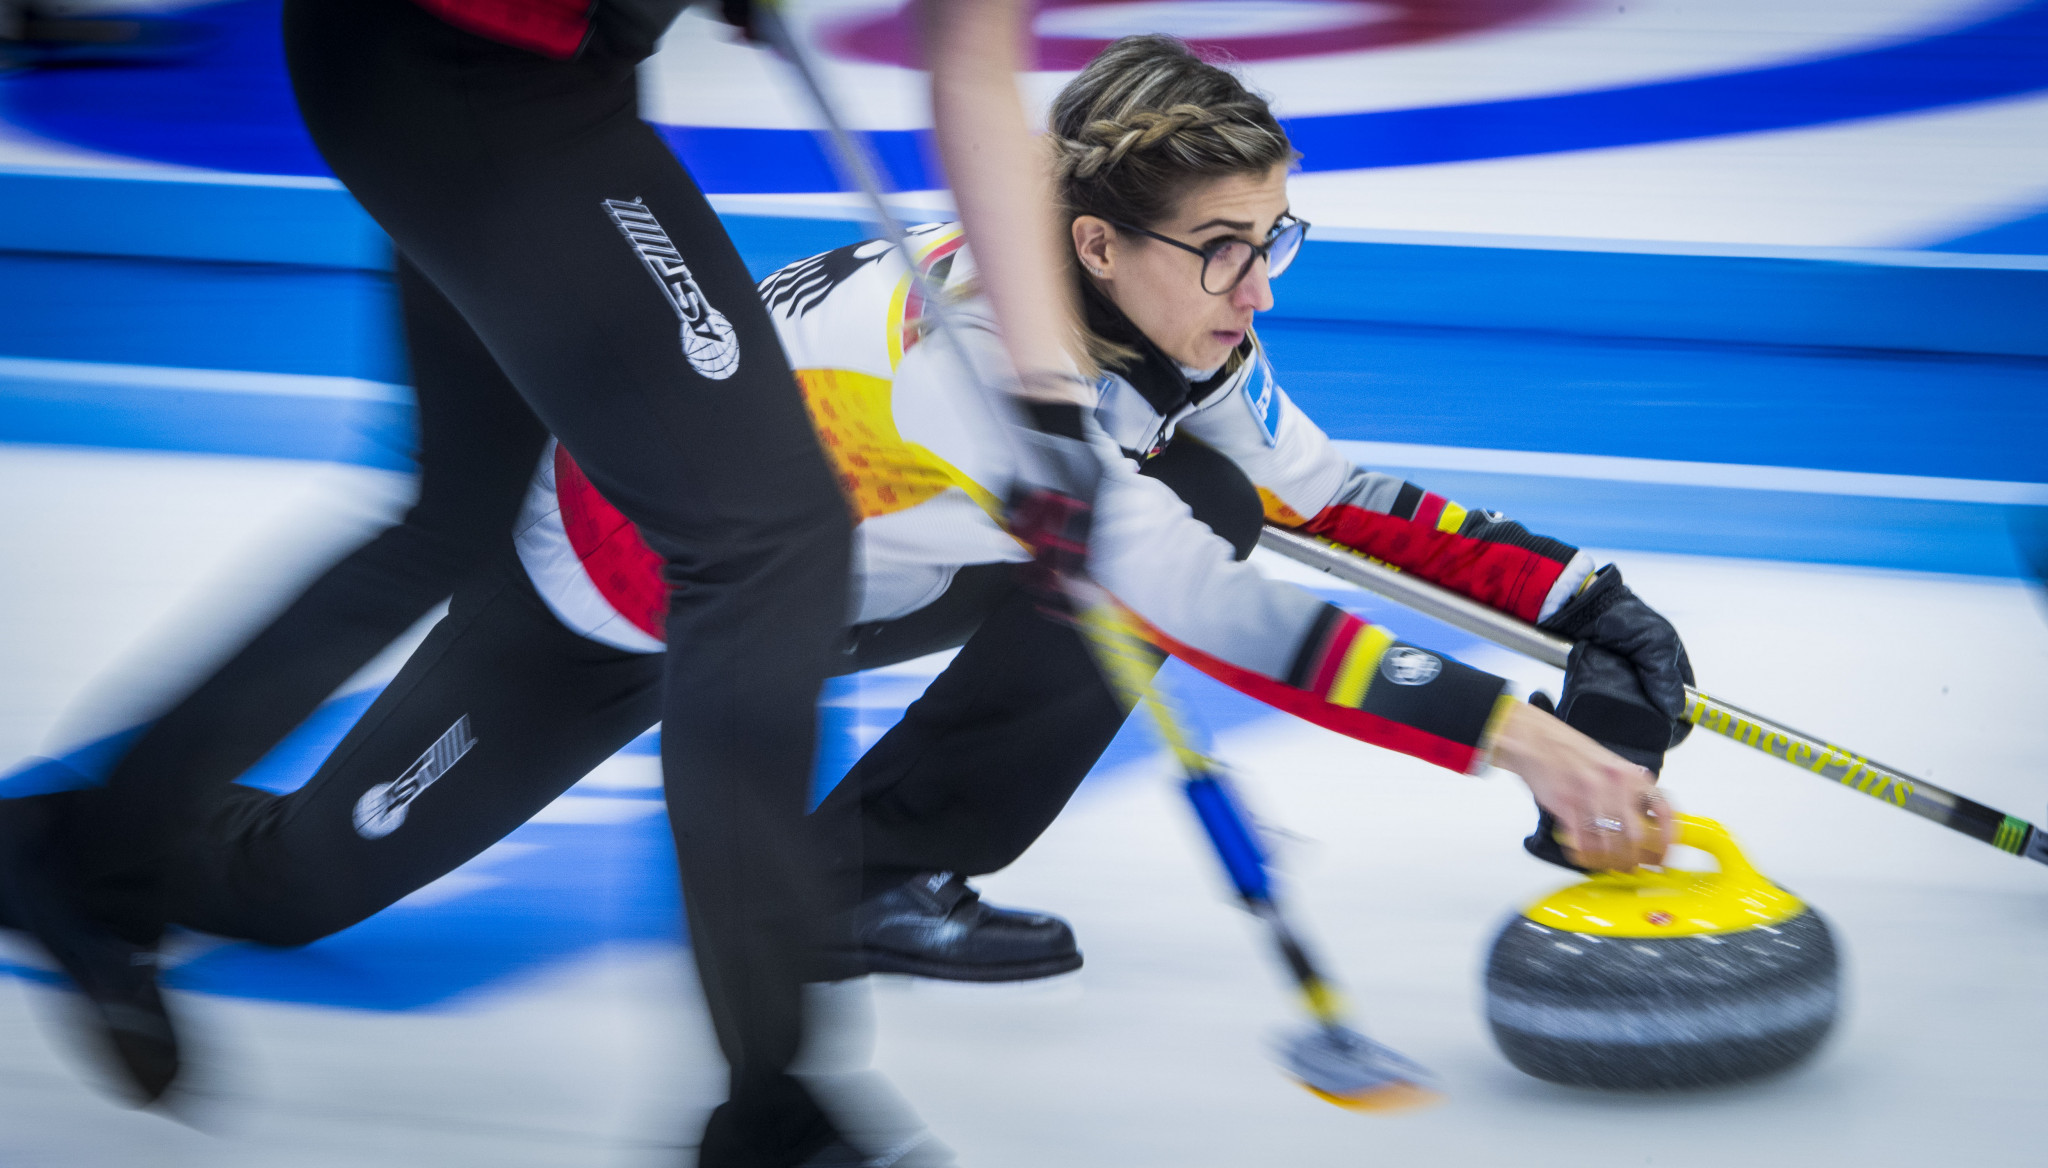 Germany's Daniela Jentsch in action at the 2018 Qinghai International Curling Elite ©Getty Images